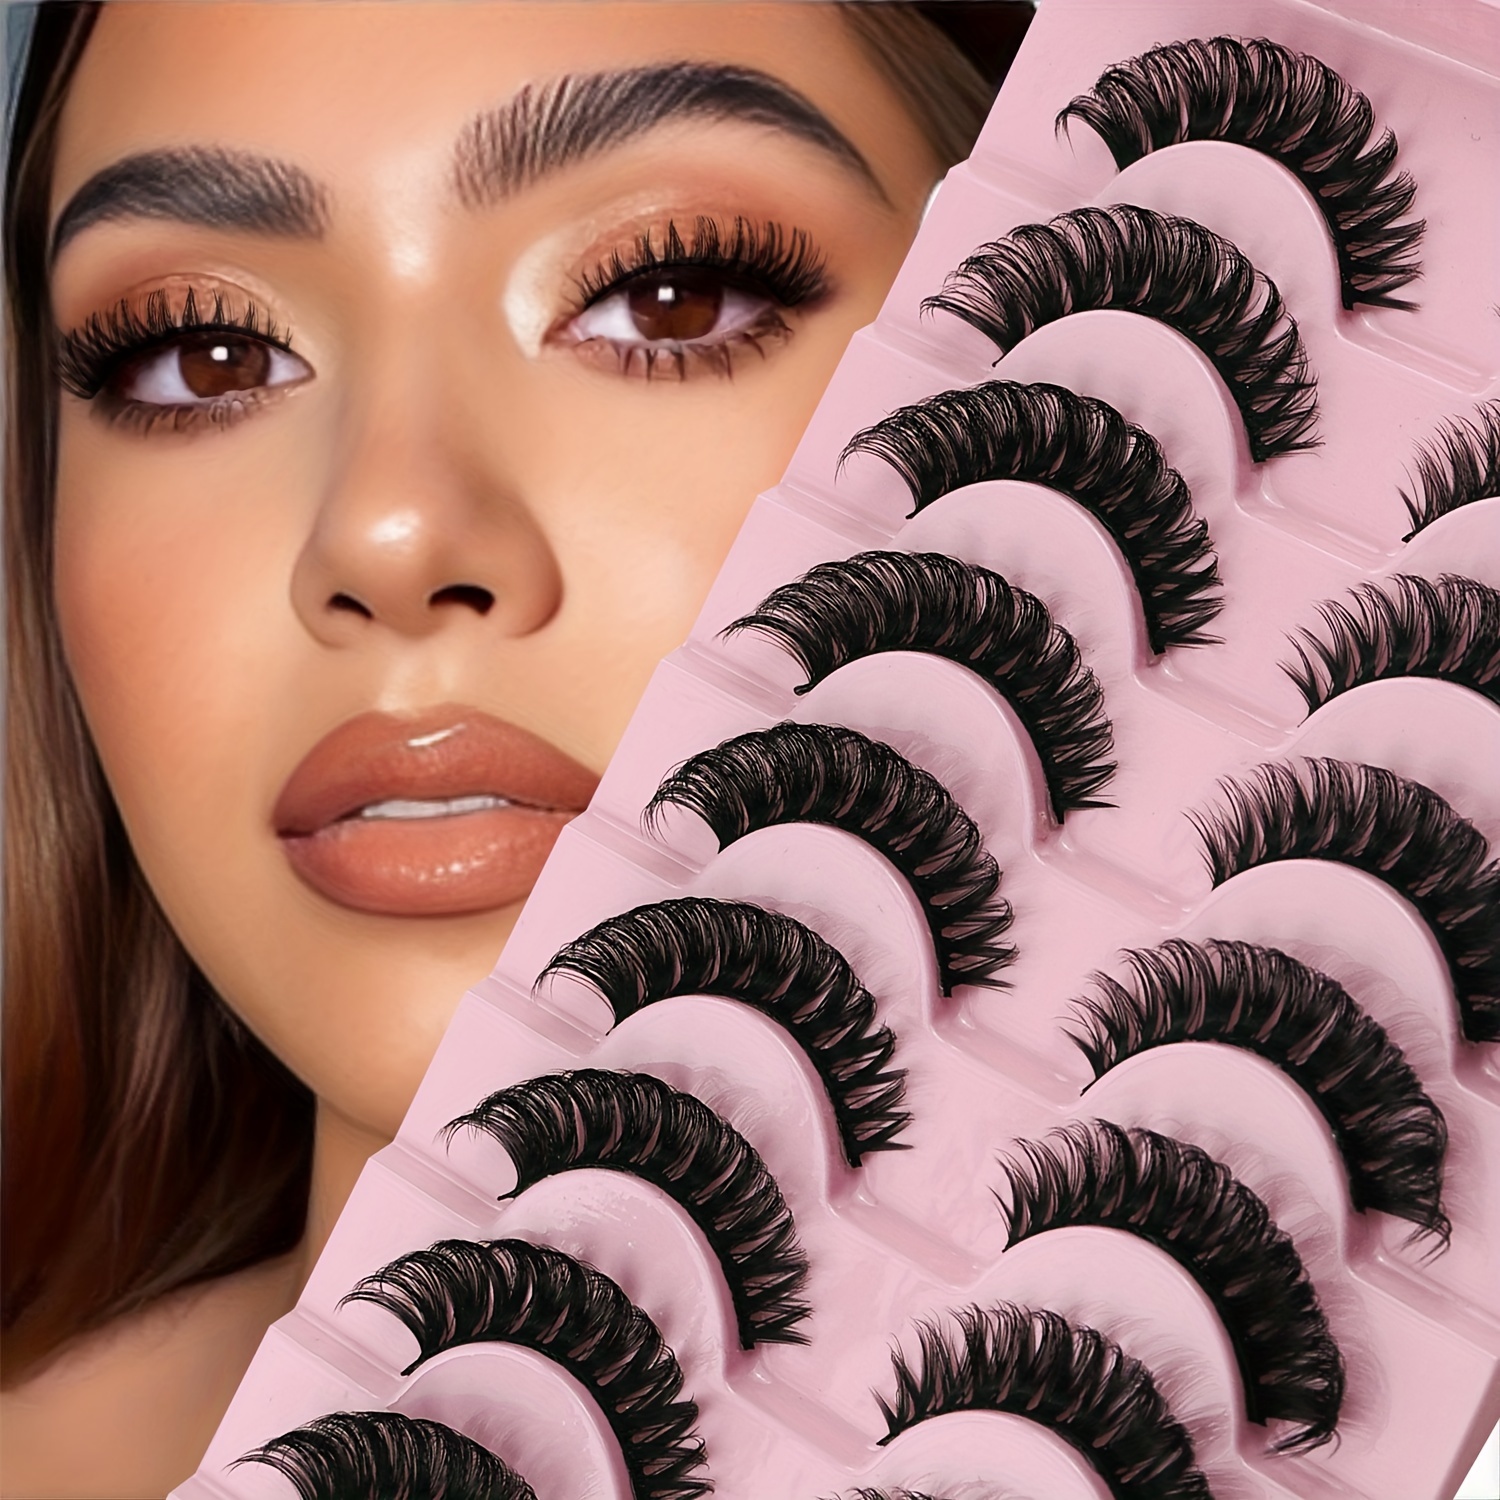 

Ichickiss 10 Pairs Of Luxurious 5d Faux Mink Eyelashes - Reusable, Fluffy & Natural Fox Eye Look For A Dramatic Lift And Volumizing Effect